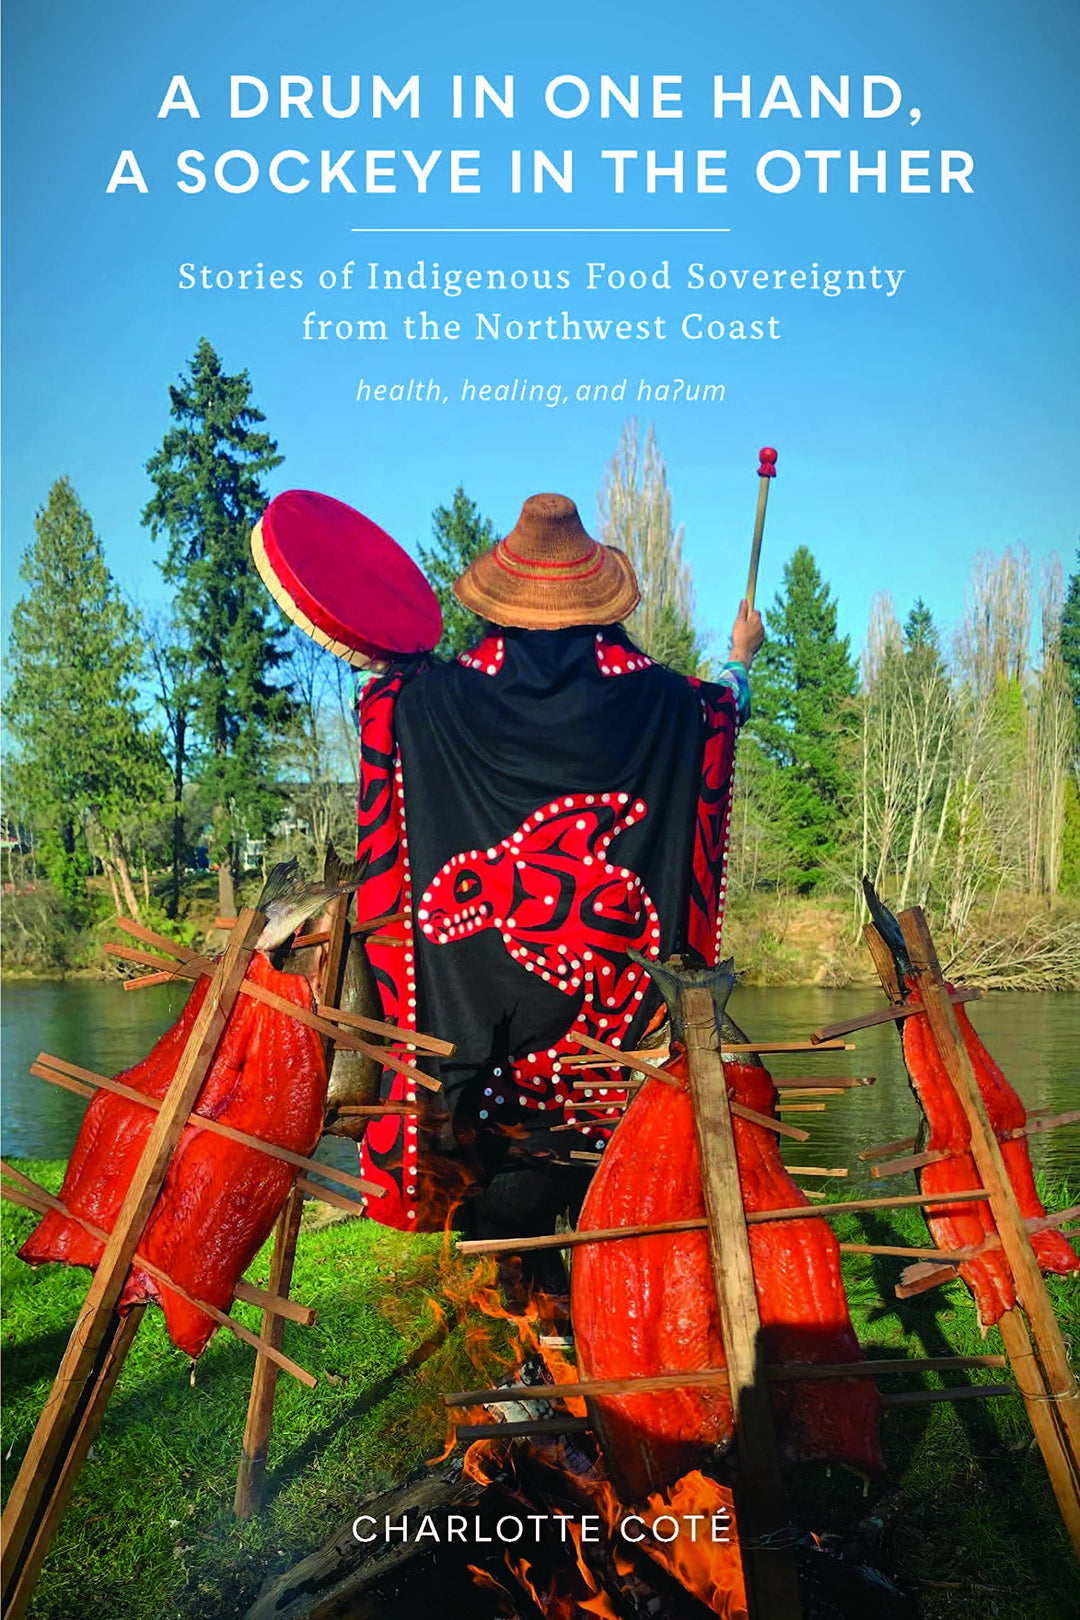 A Drum in One Hand, a Sockeye in the Other: Stories of Indigenous Food Sovereignty from the Northwest Coast by Charlotte Coté